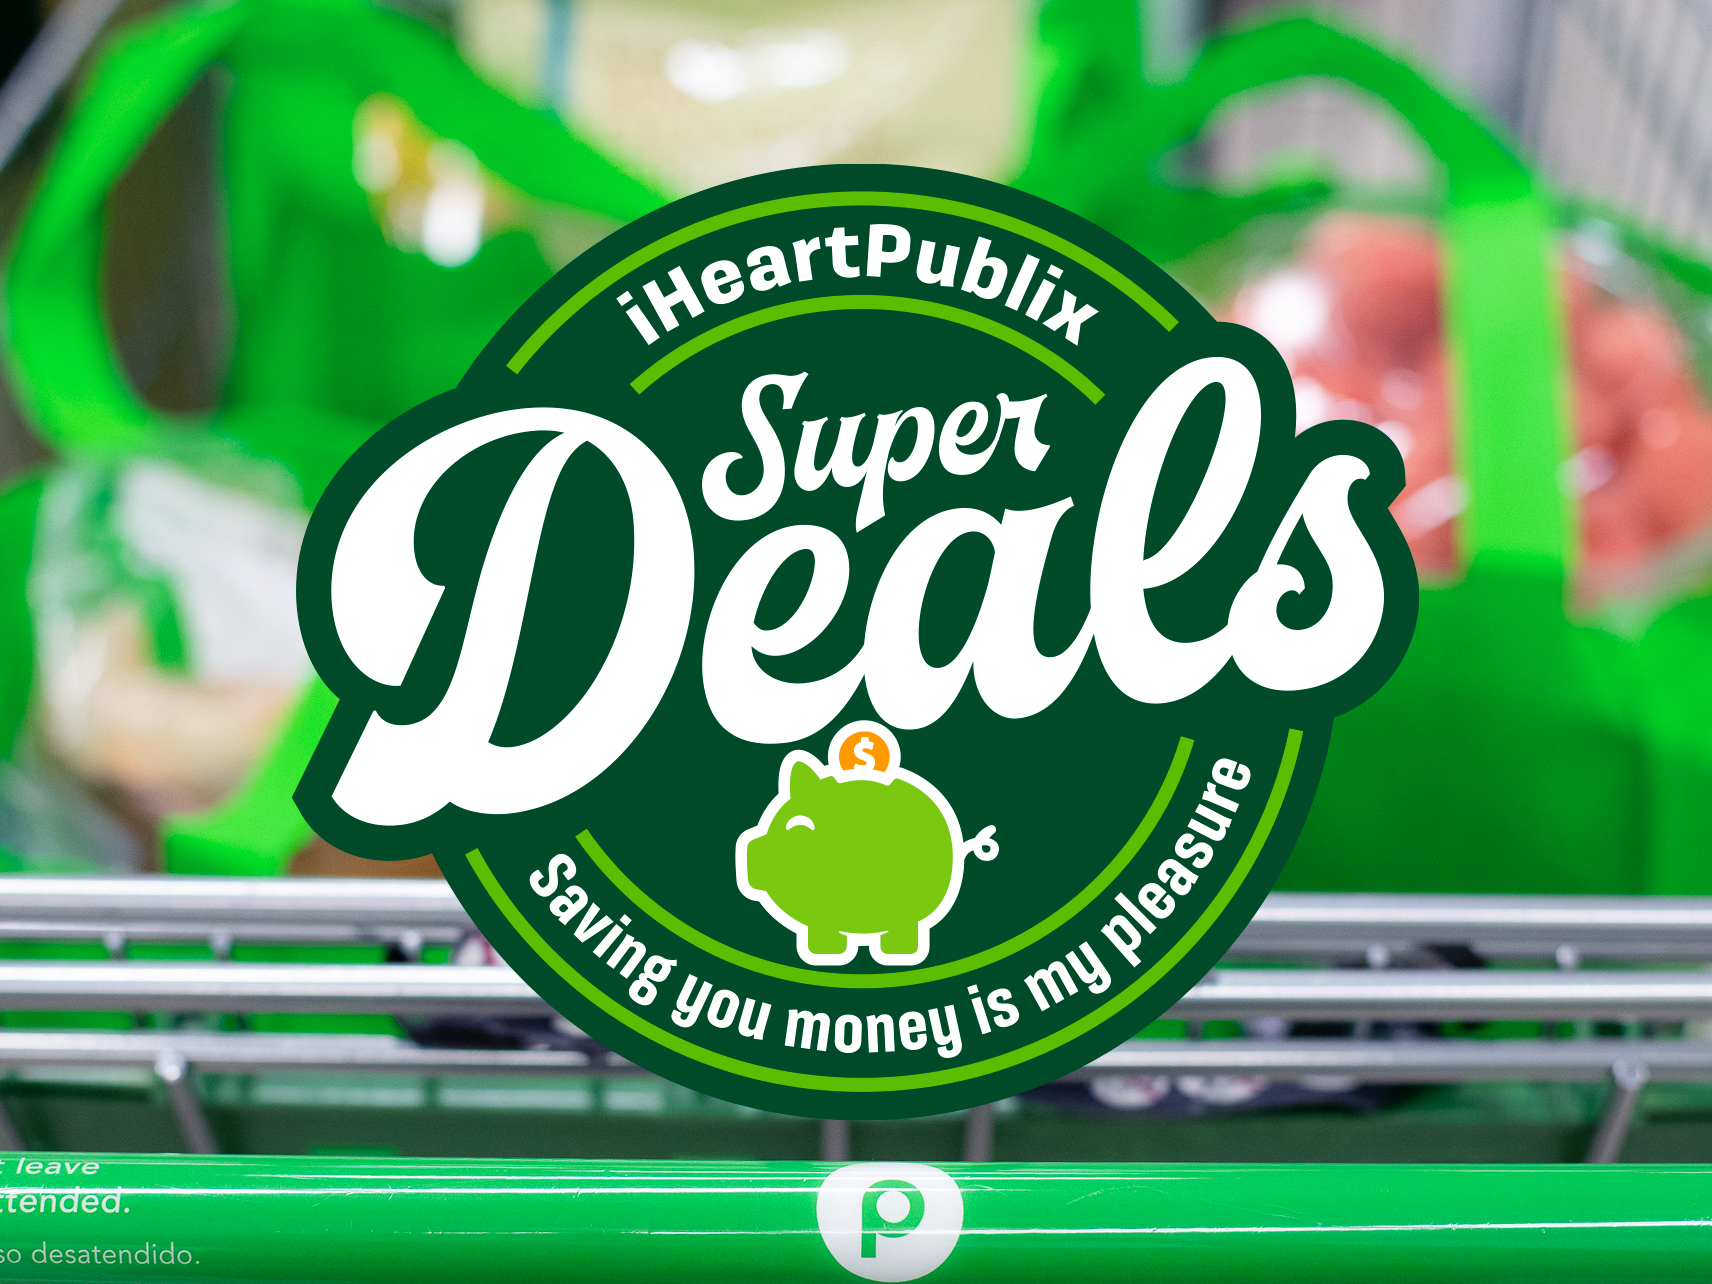 Publix Super Deals Week Of 5/25 to 5/31 (5/24 to 5/30 For Some)